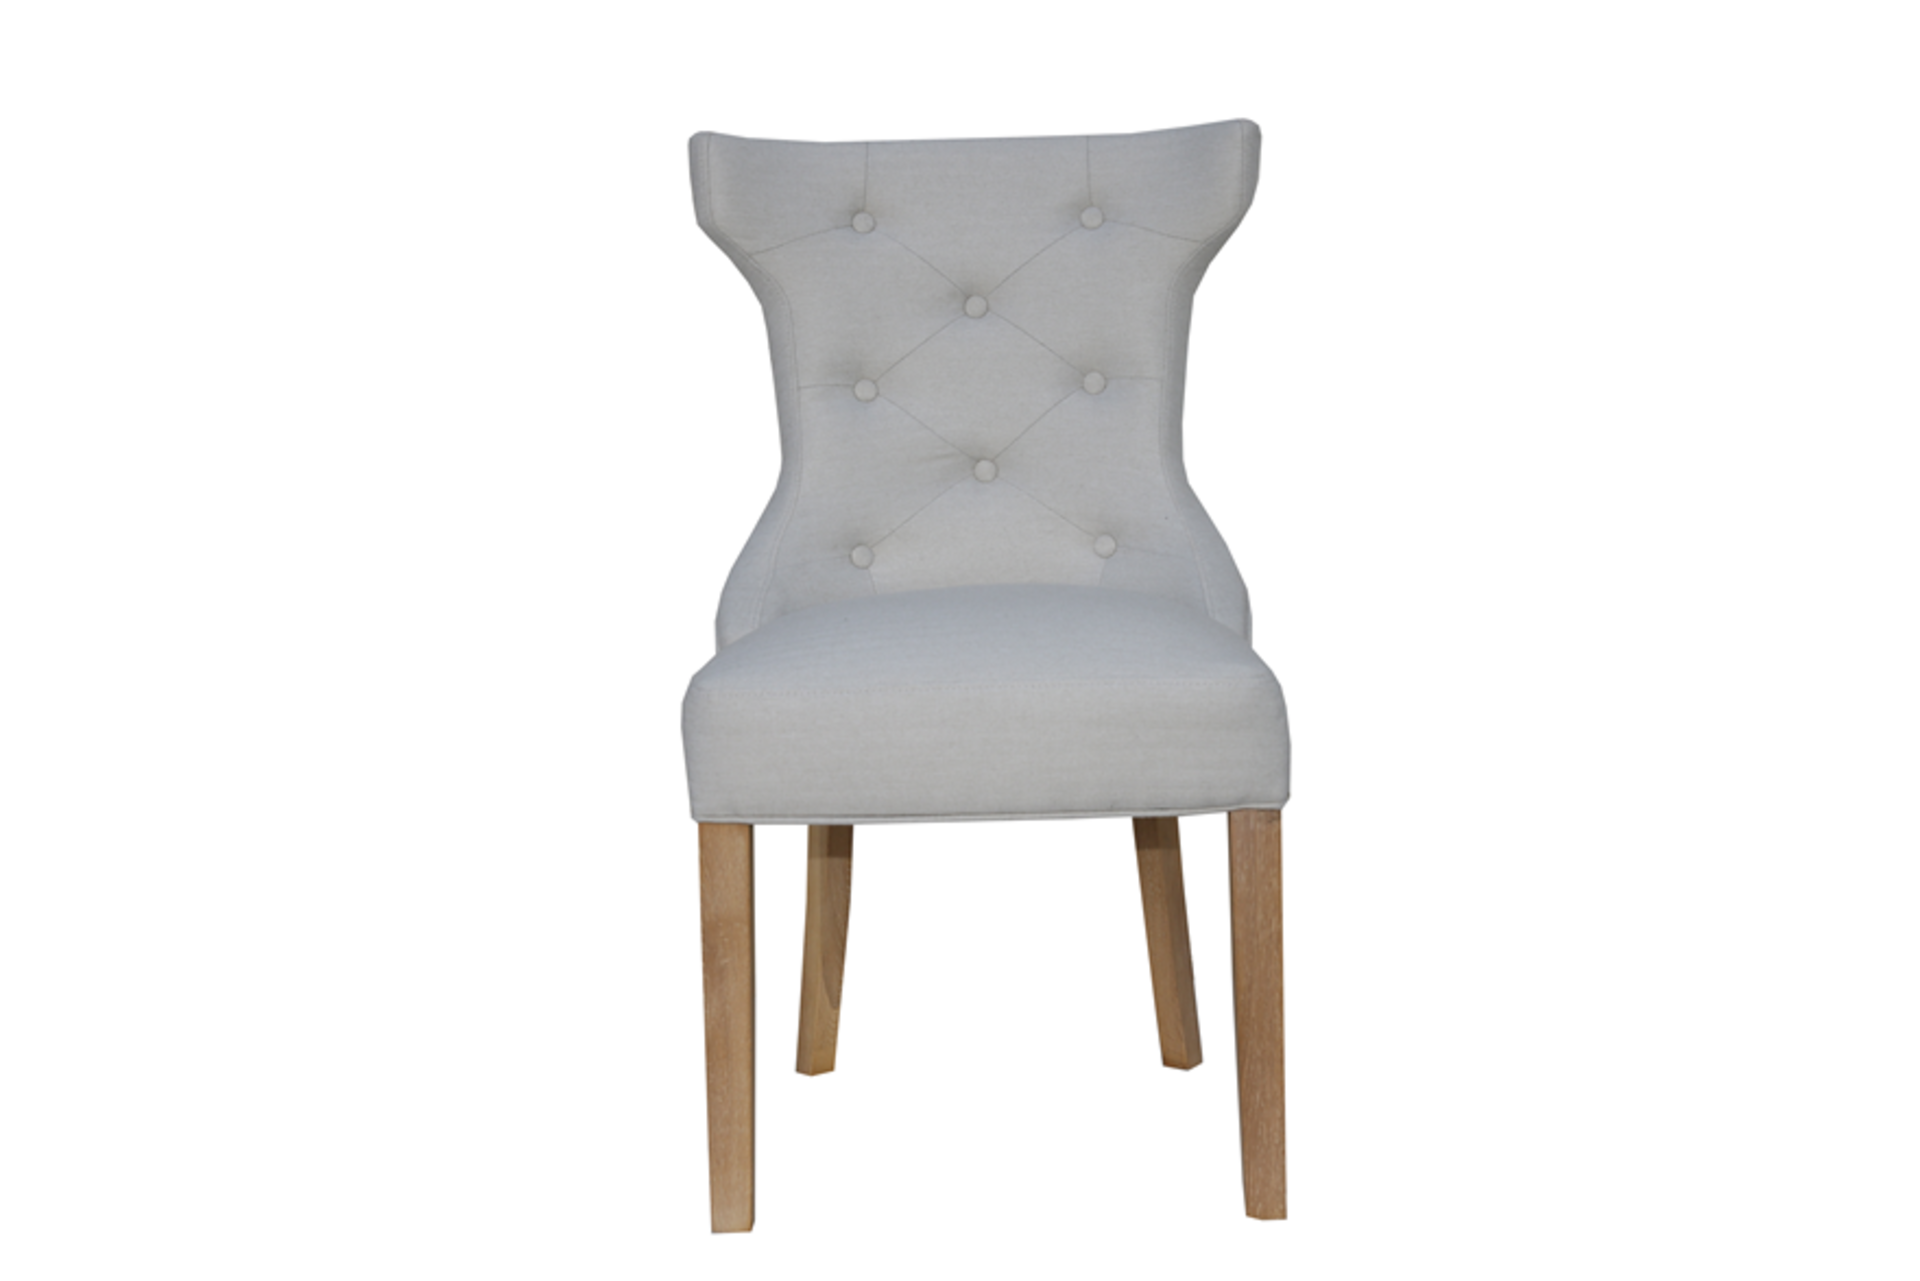 High Wing Dining Chair With Ring Pull This Is A Luxurious Dining Chair Designed With Flowing - Image 2 of 2